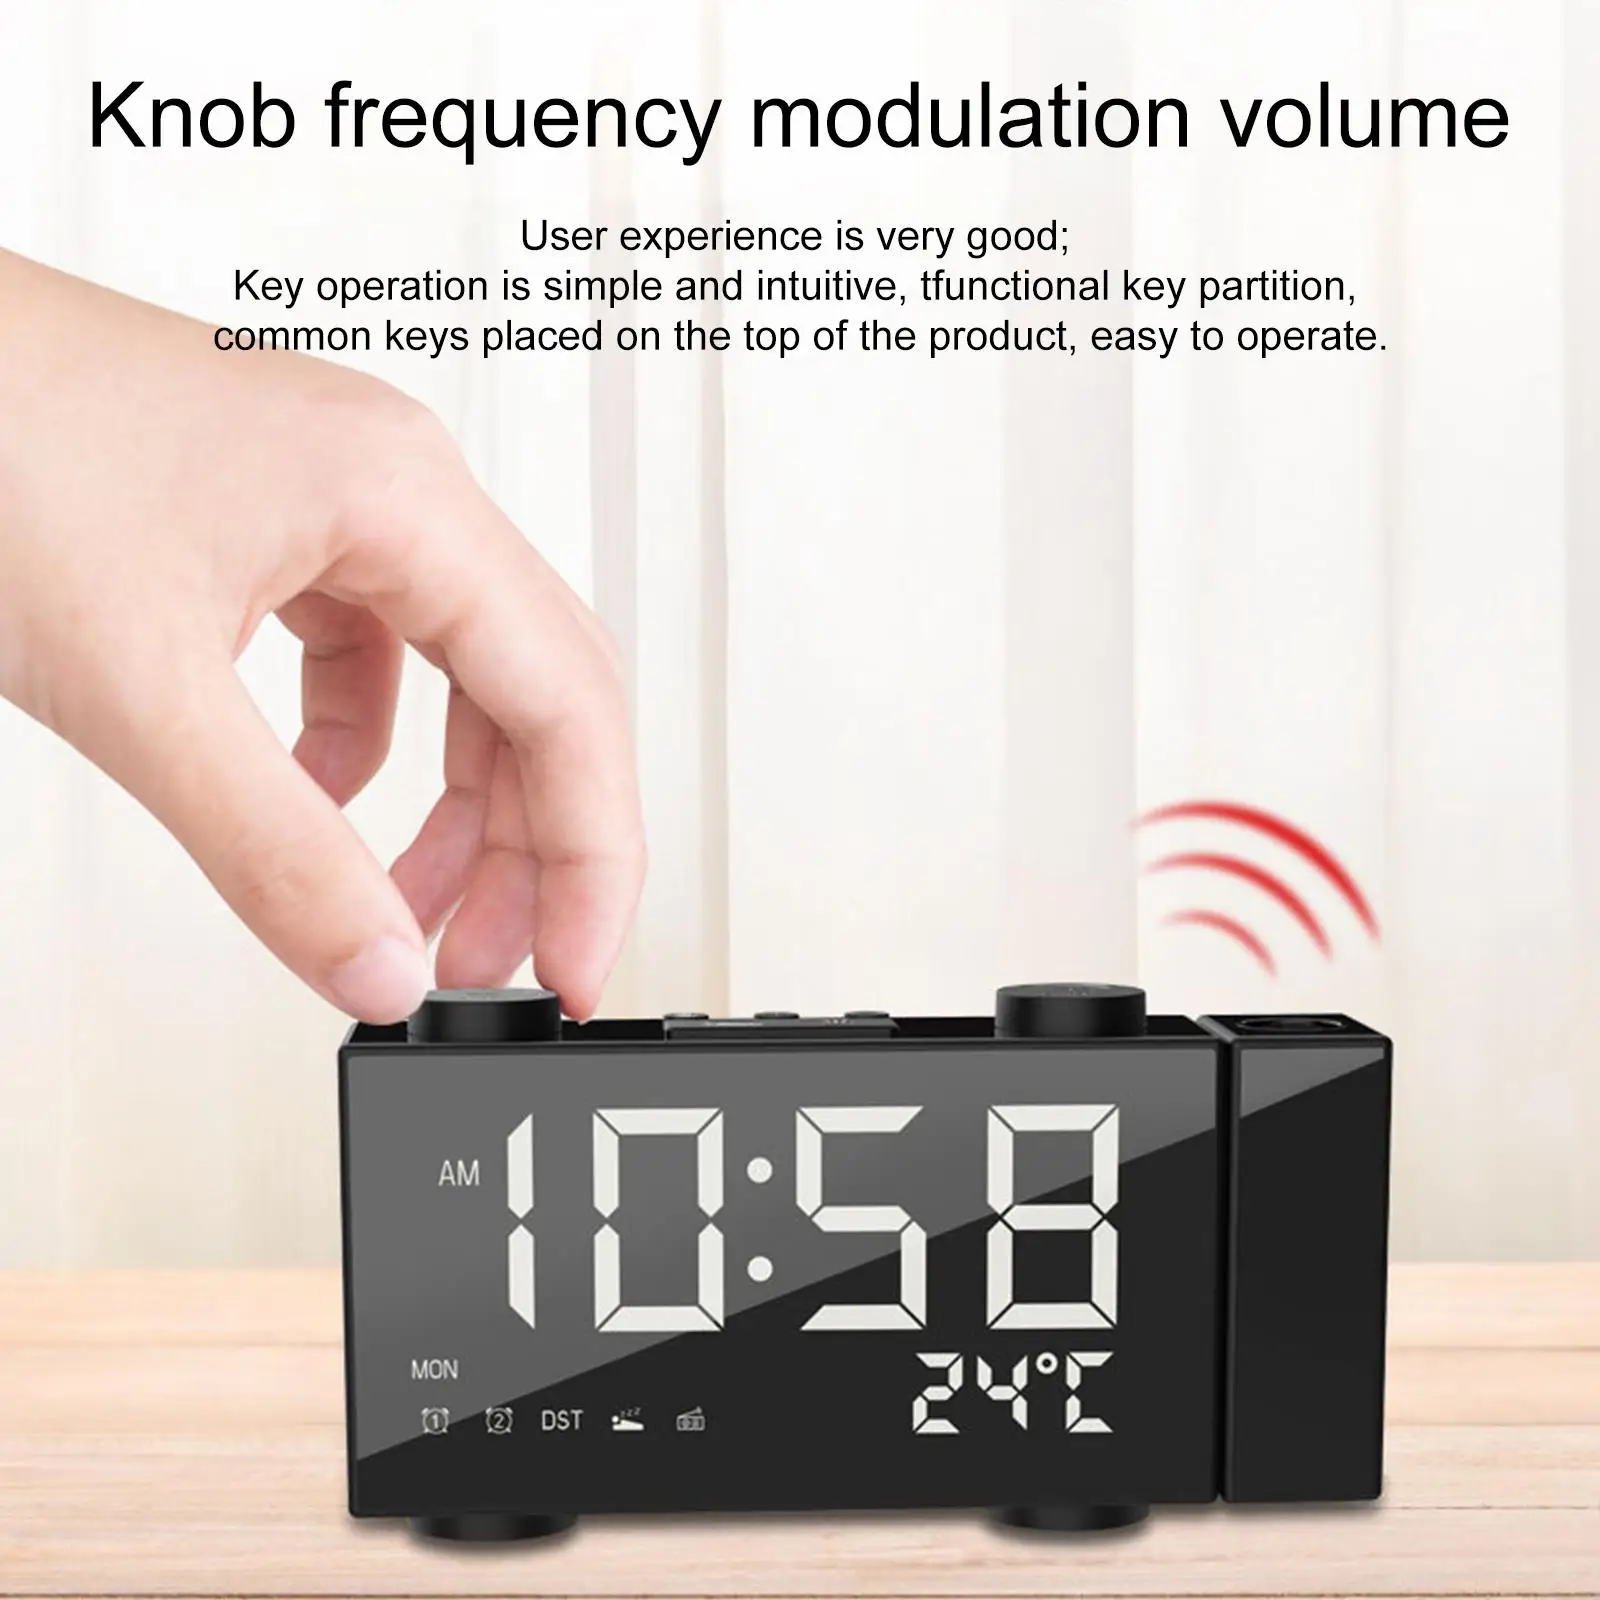 Projection Alarm Clock 4 Adjustable Brightness Large LED with USB Charging Port 12/24H for Ceiling Wall Office Home Kid Elderly